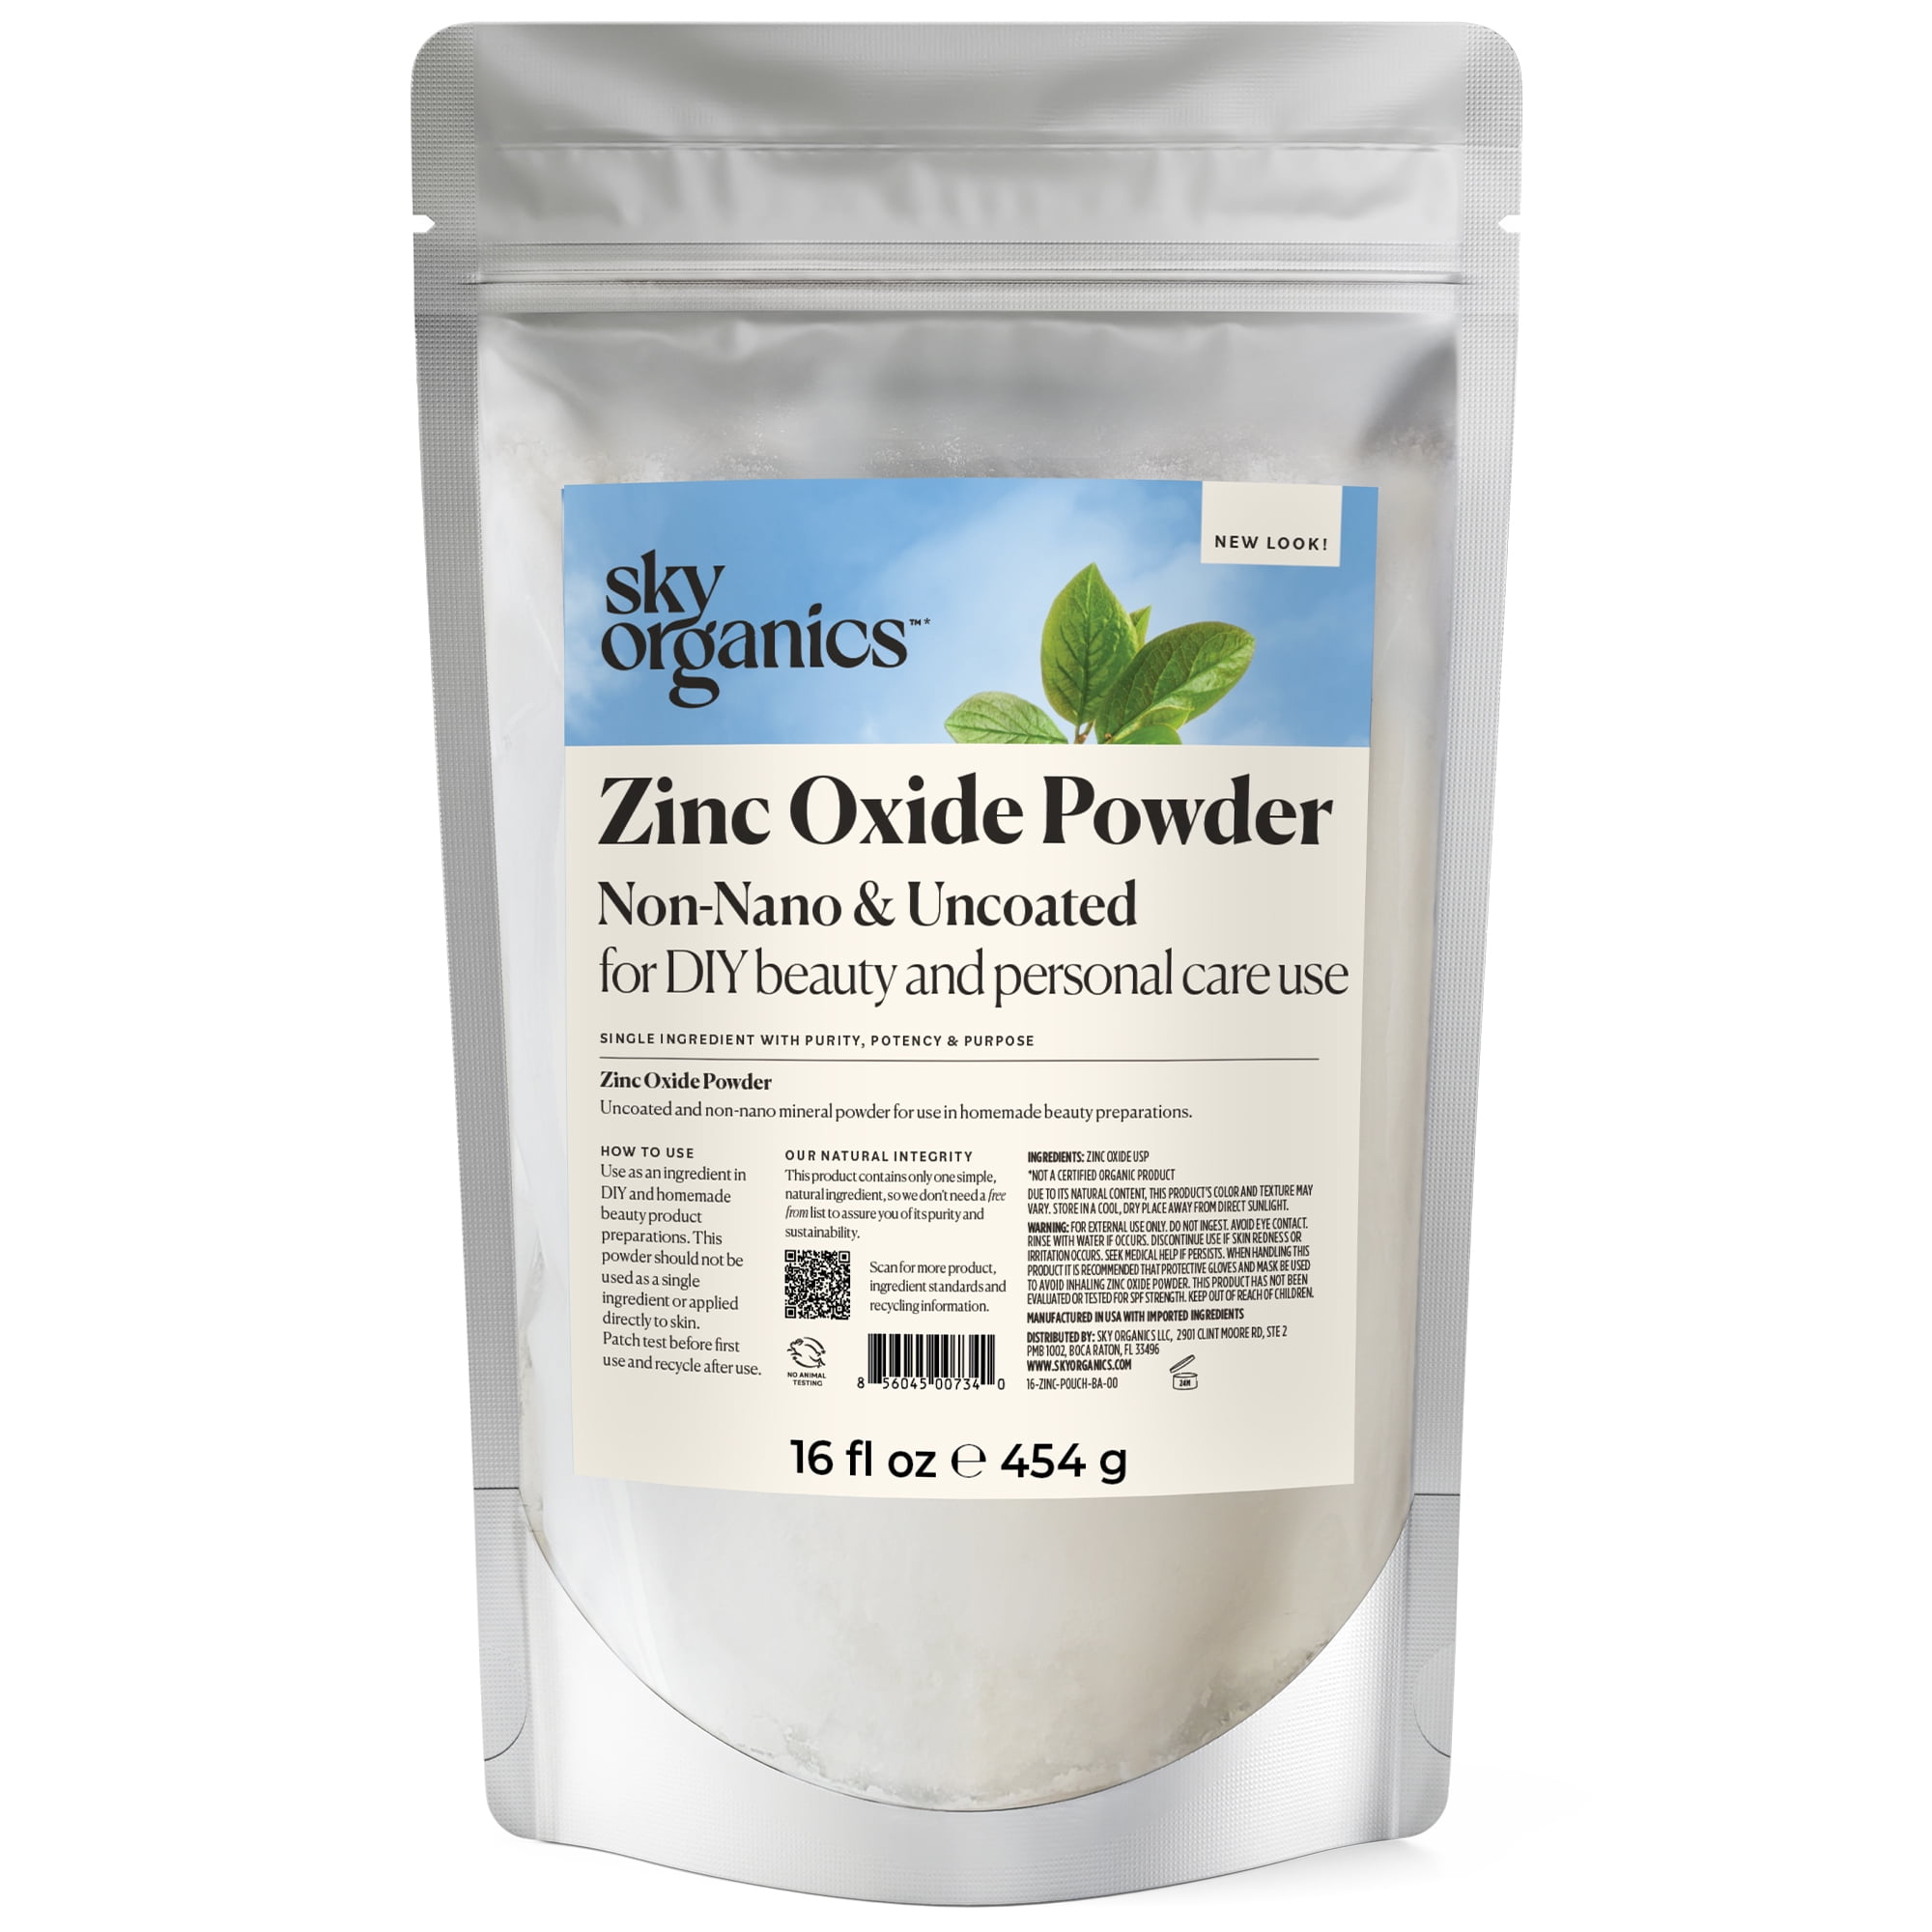 Zinc Oxide Powder by Sky Organics, Non-nano and uncoated for Body for DIY,  16 oz - 454g. 